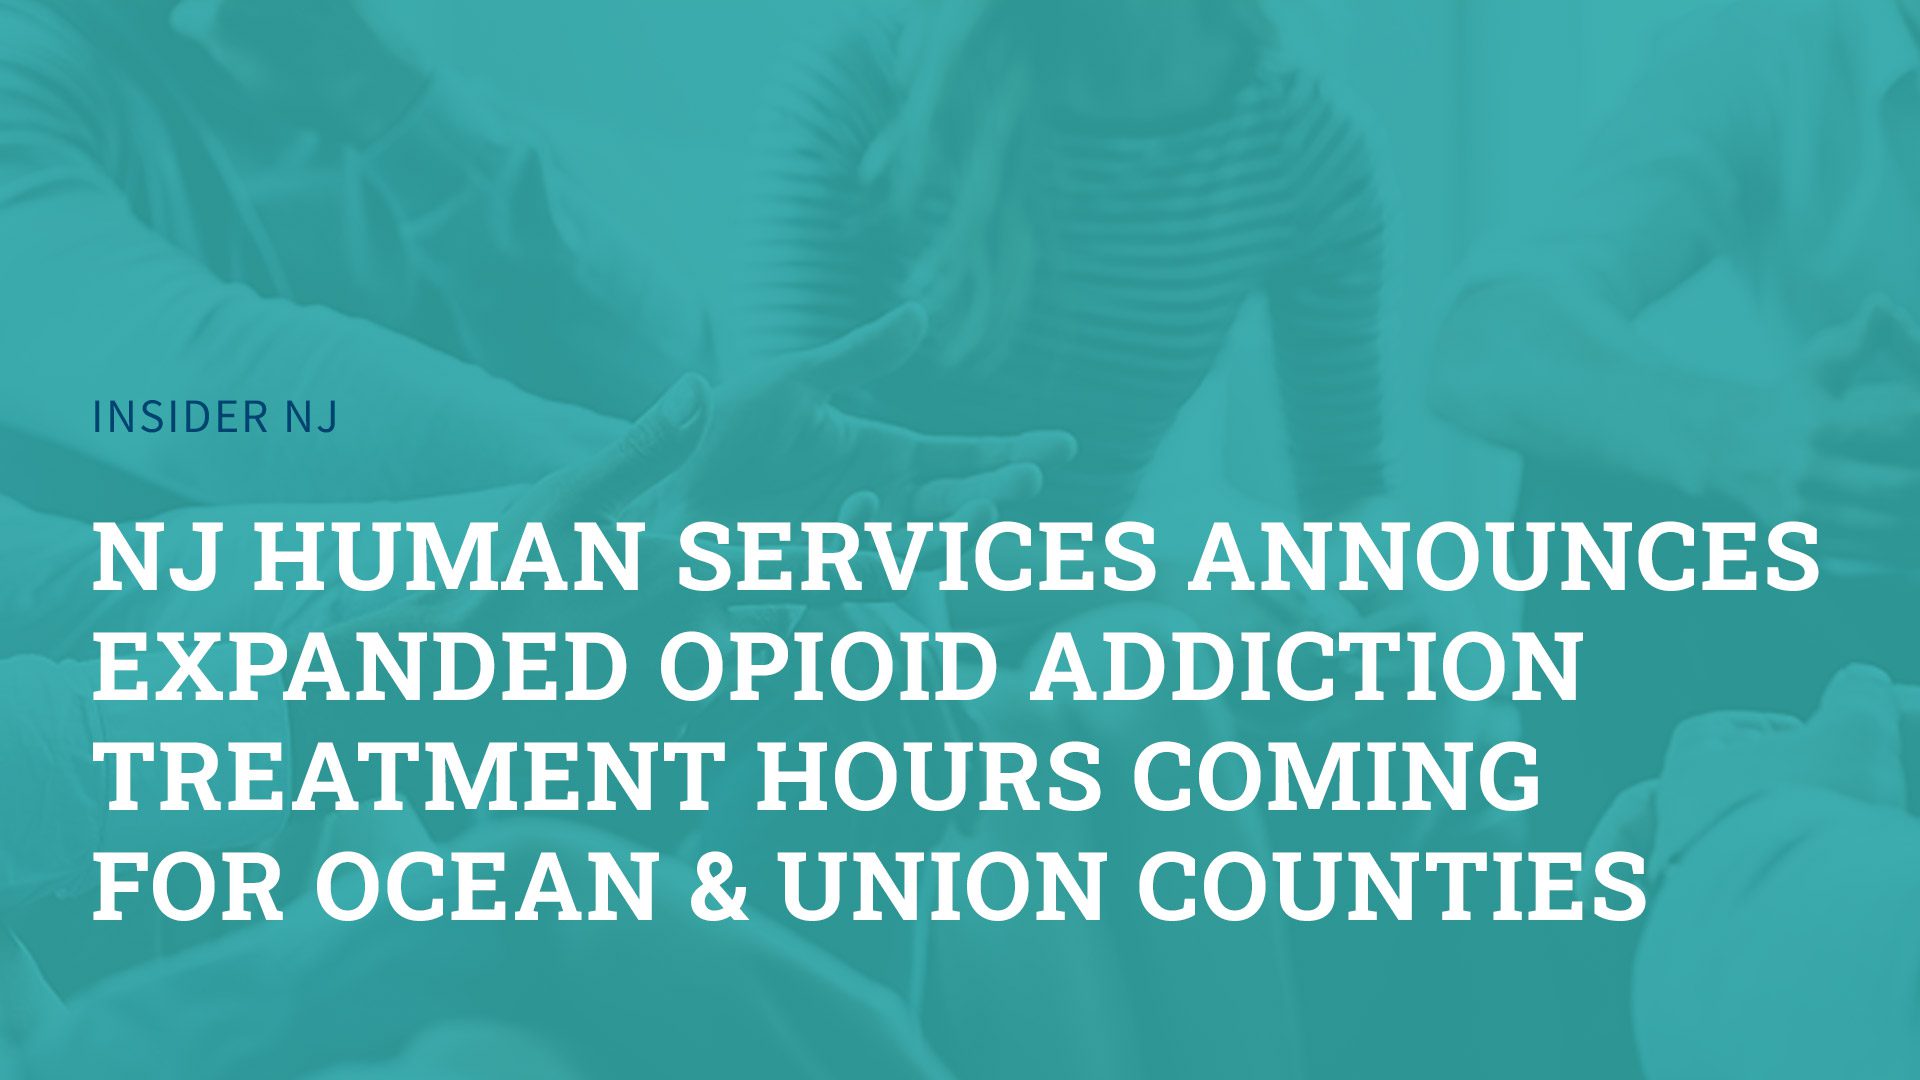 NJ Human Services Announces Expanded Opioid Addiction Treatment Hours Coming for Ocean & Union Counties